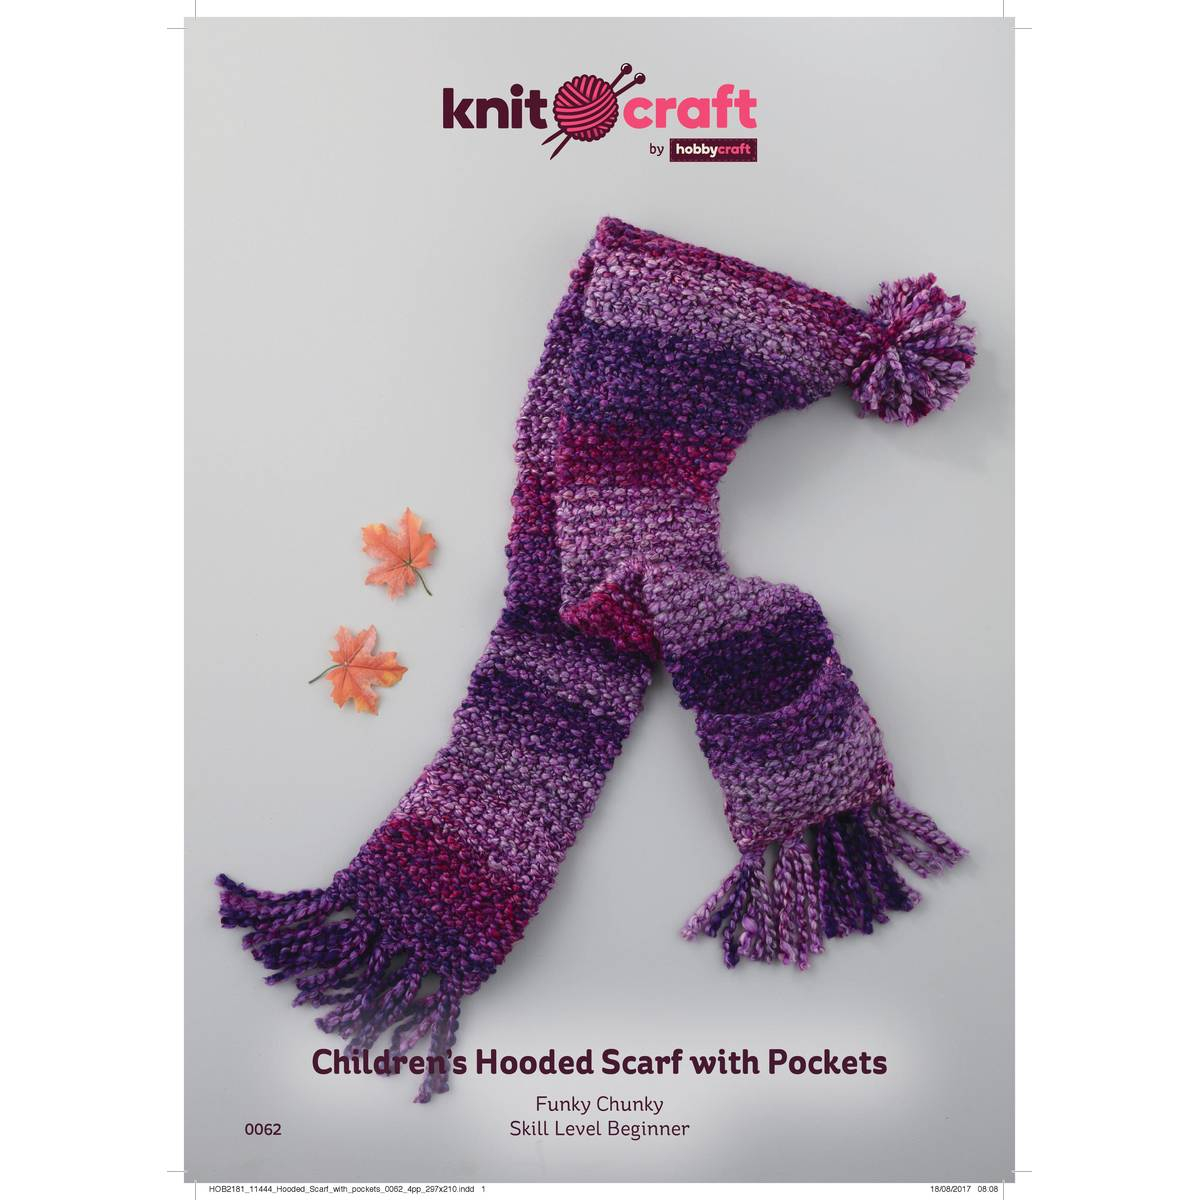 Knitted Hood Scarf Pattern Knitcraft Childrens Hooded Scarf With Pockets Digital Pattern 0062